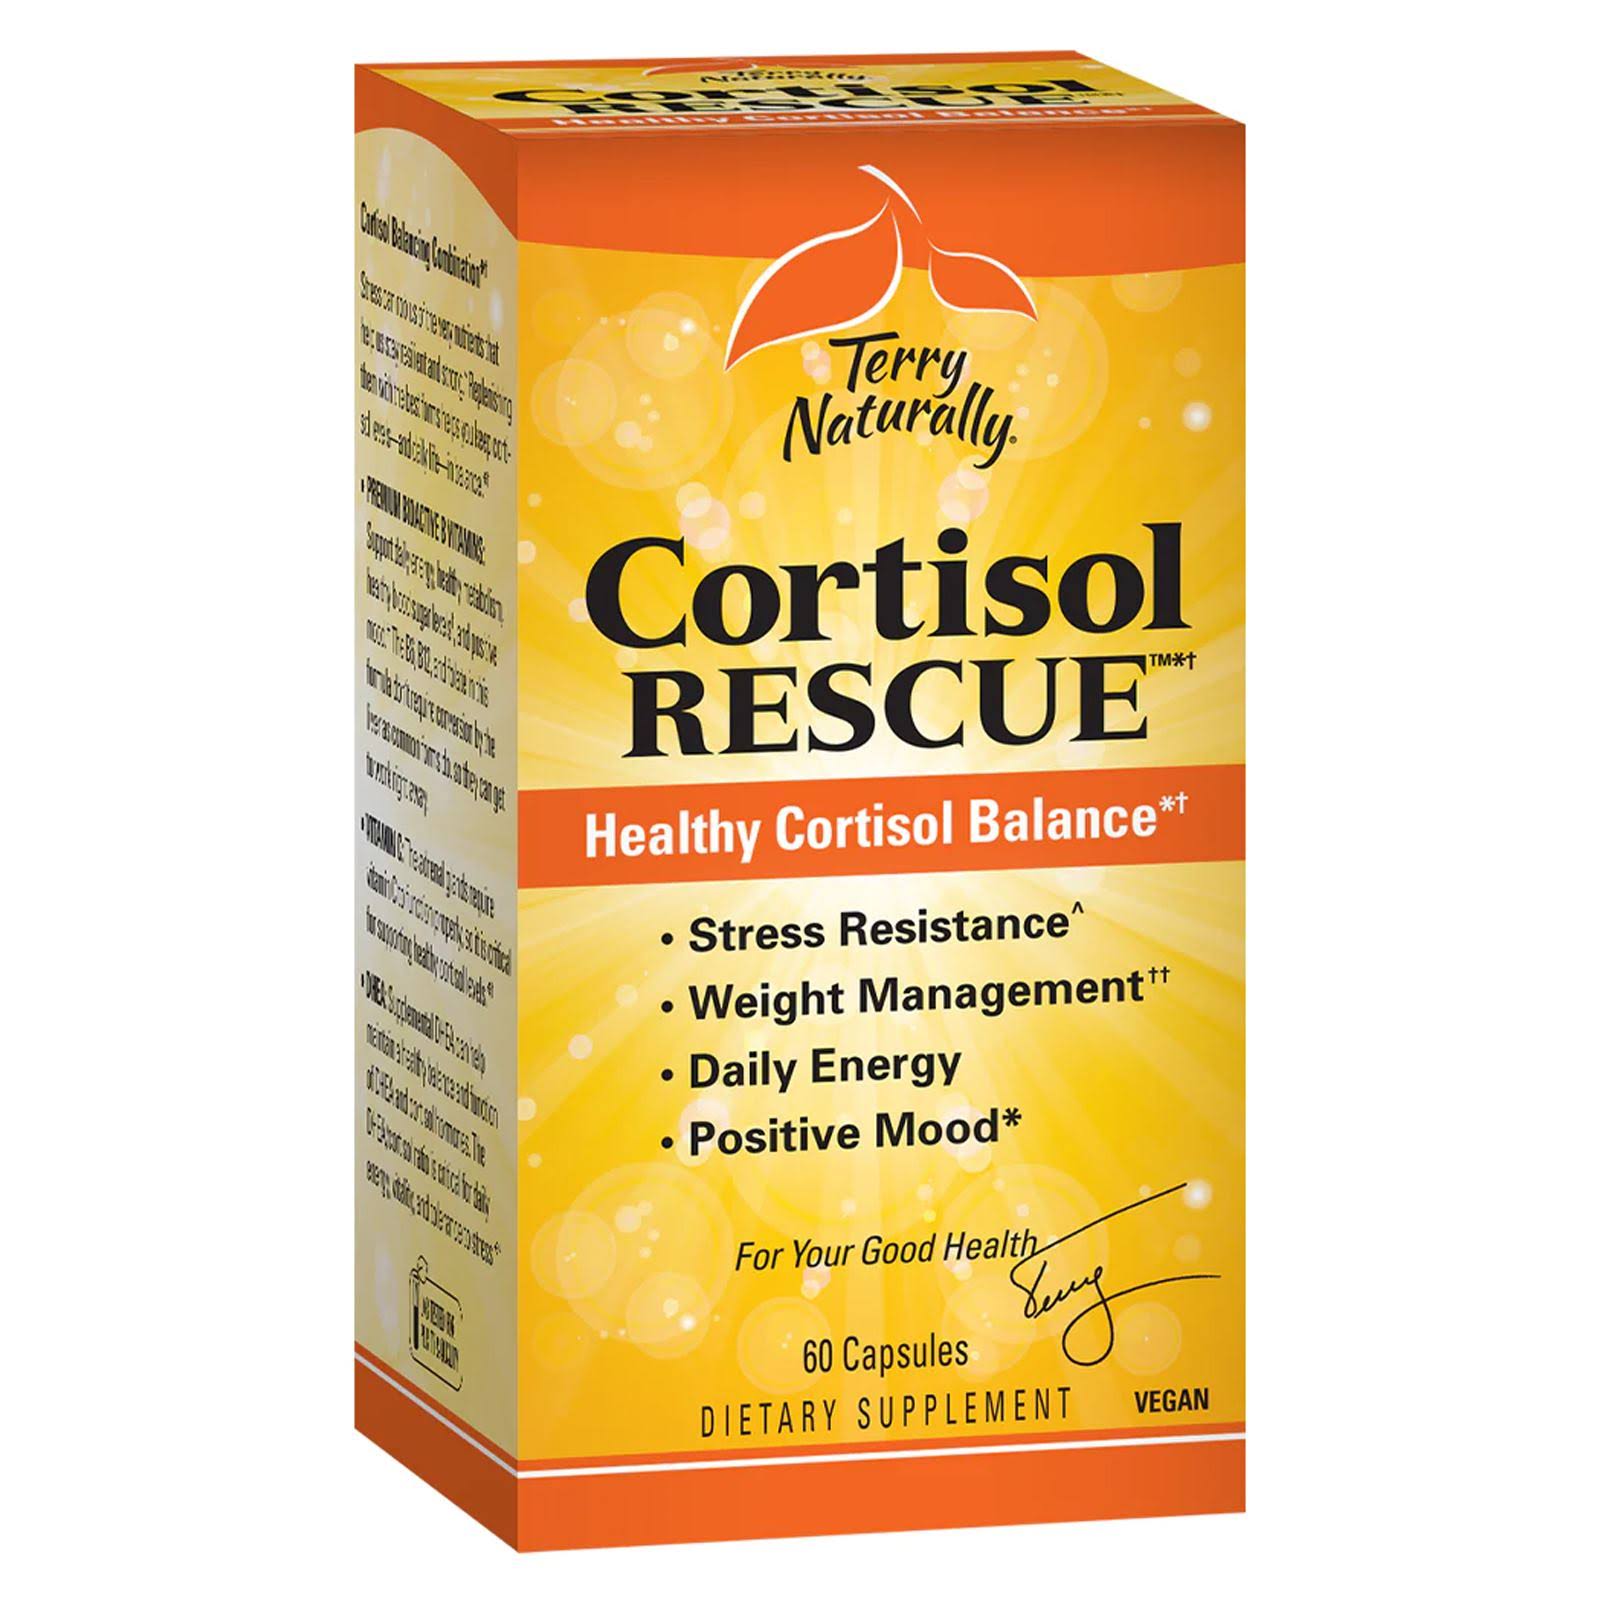 Terry Naturally Cortisol Rescue 60 Caps